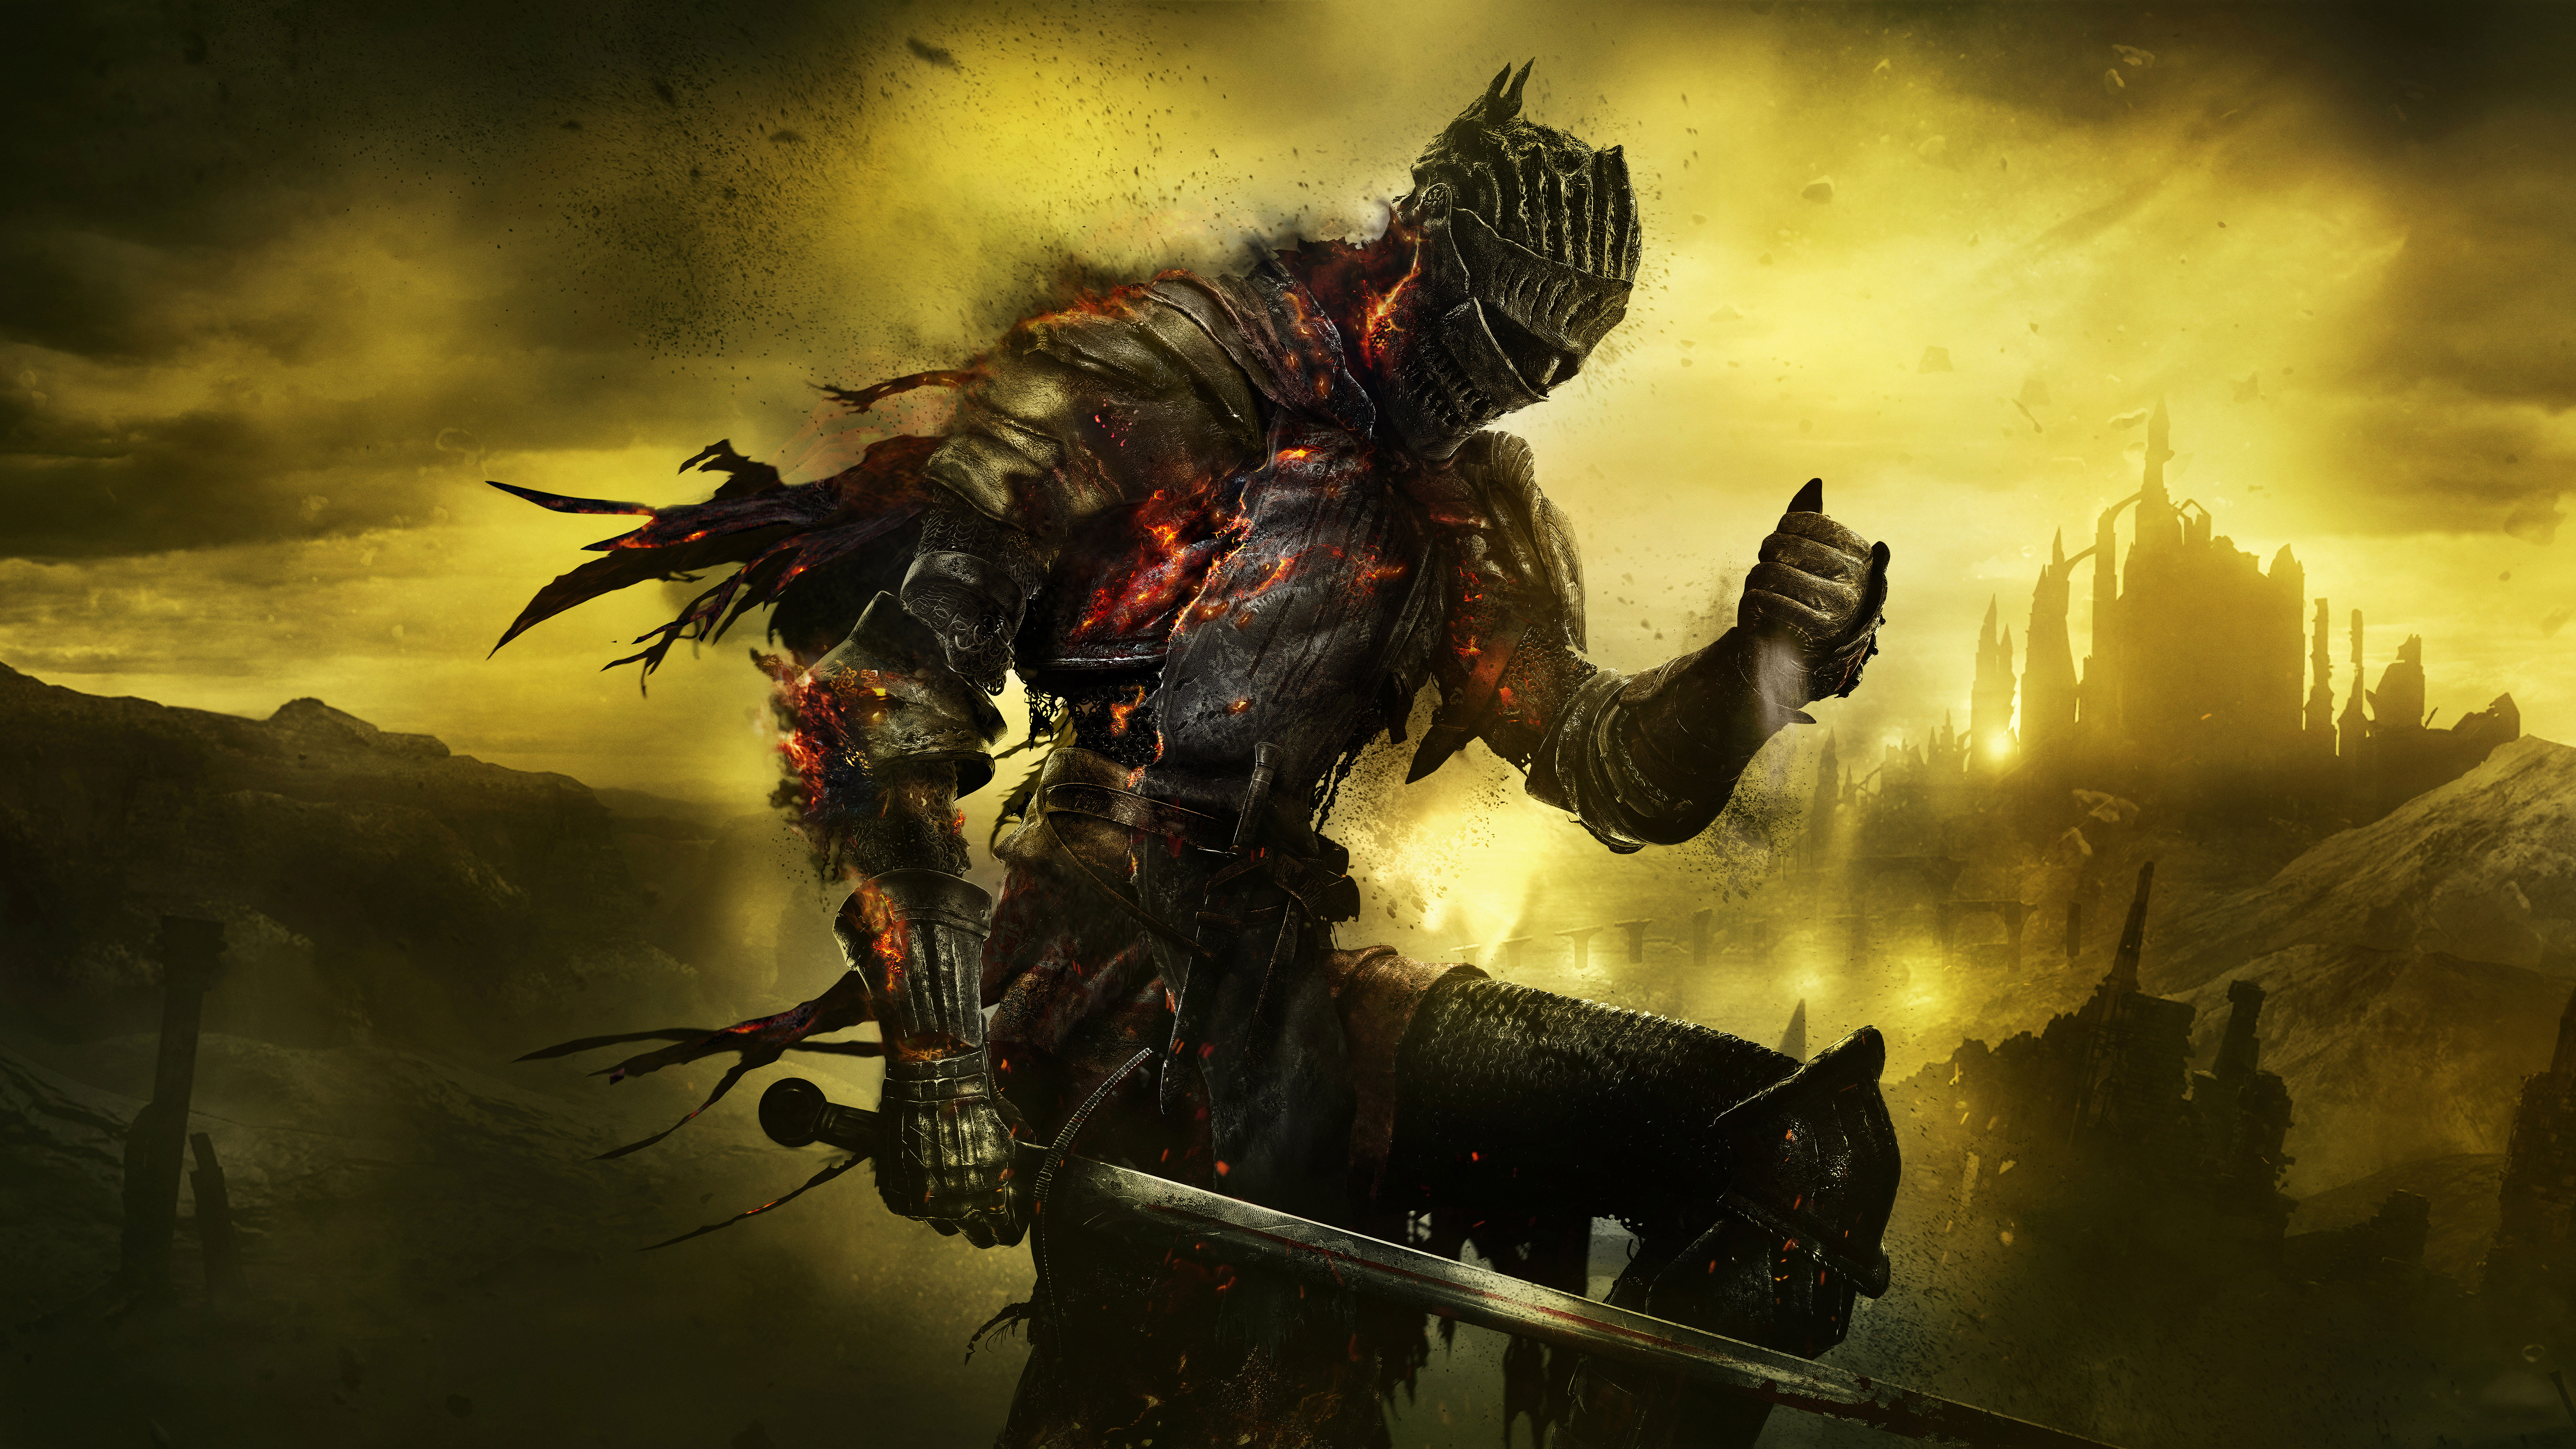 dark souls iii wallpaper,action adventure game,pc game,cg artwork,strategy video game,games